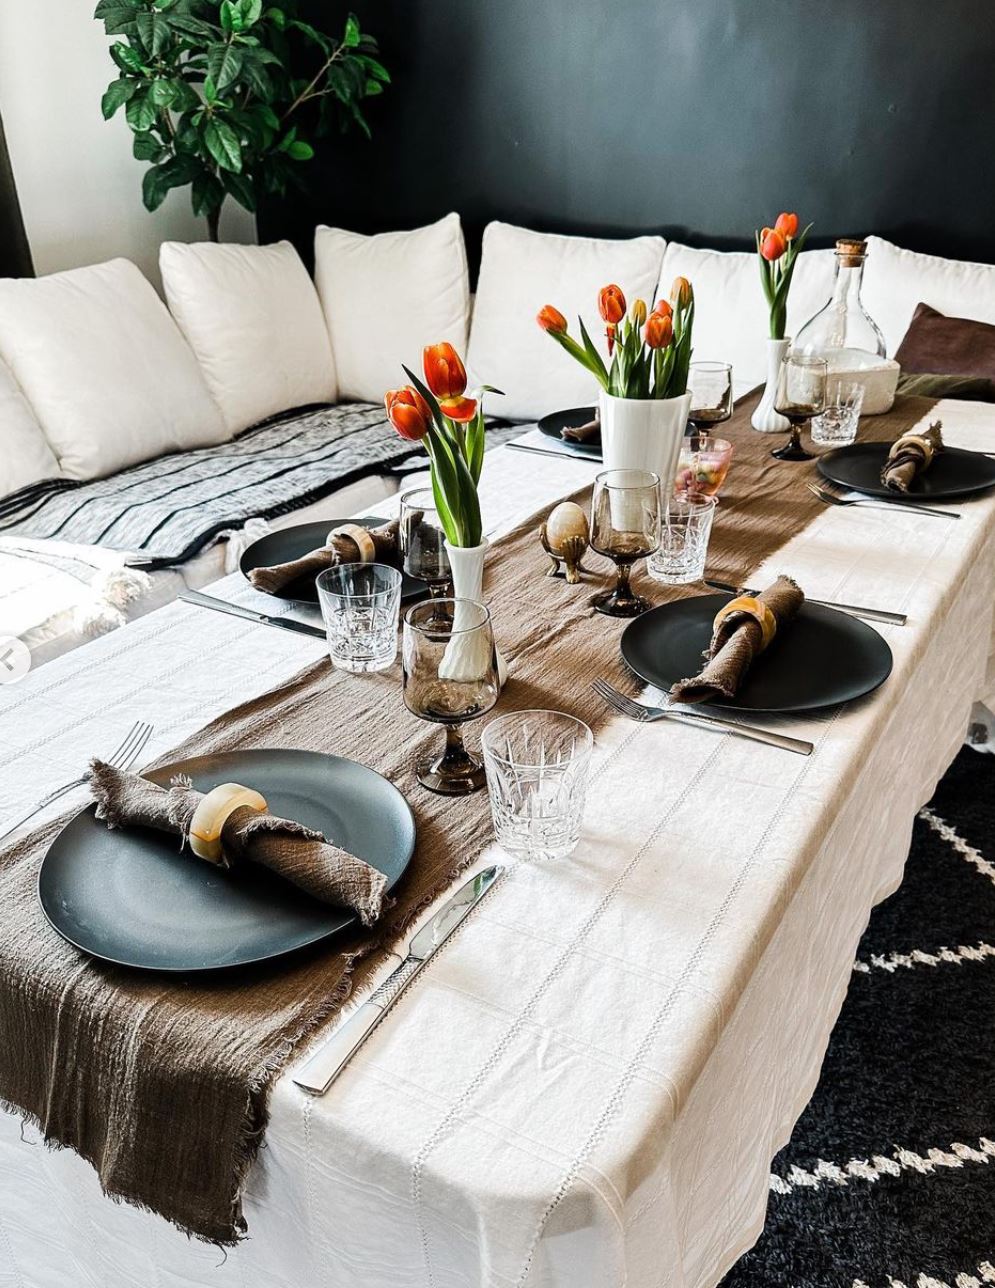 simple table setting with table cloth, napkins, table runner and black plates and cocktails and wine glasses